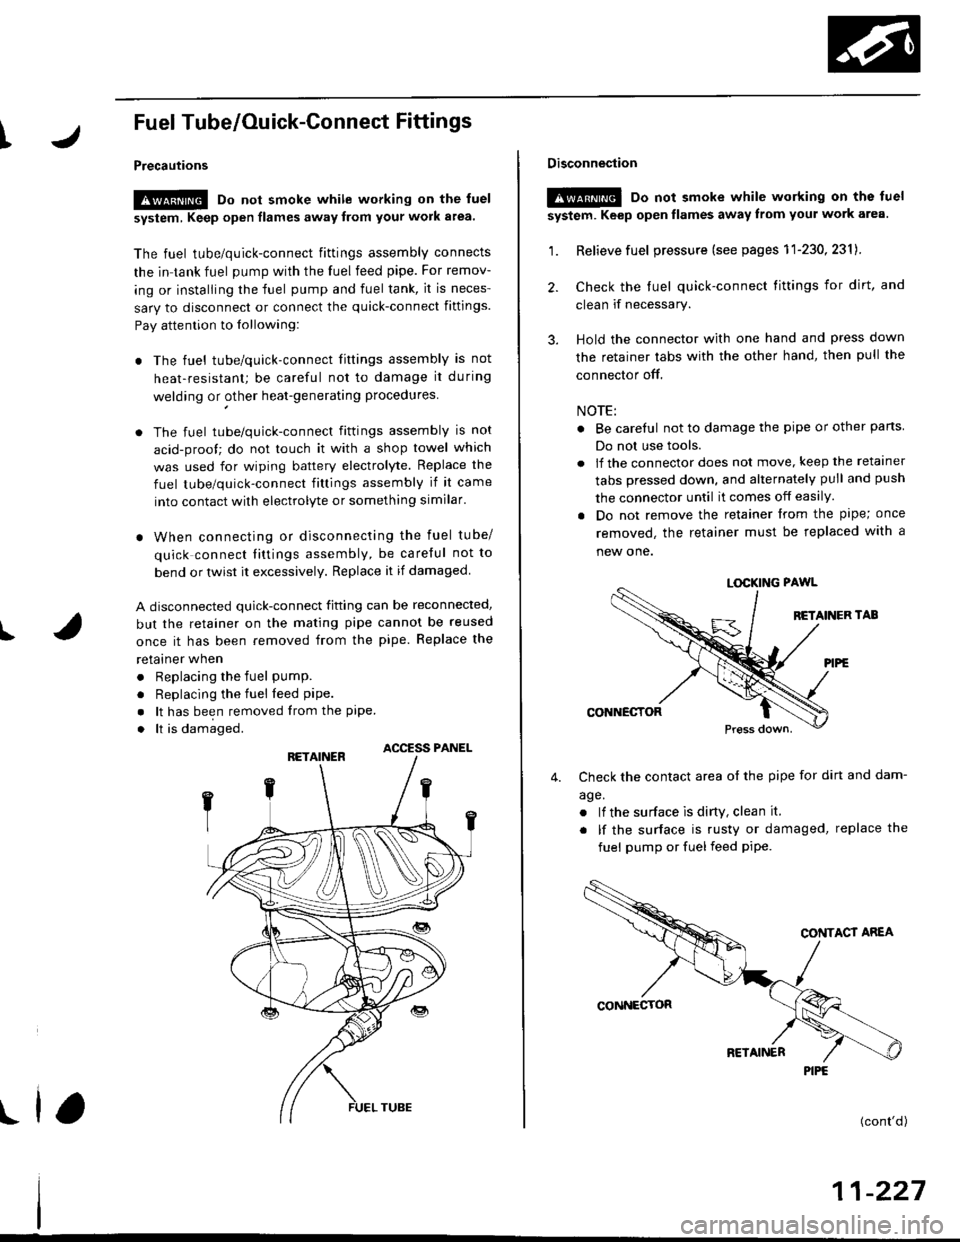 HONDA CIVIC 2000 6.G Workshop Manual I
Fuel Tube/Ouick-Gonnect Fittings
Precautions
!@ Do not smoke while working on the fuel
system, Keep open flames away from your work a.ea
The fuel tube/quick-connect fittings assembly connects
the i